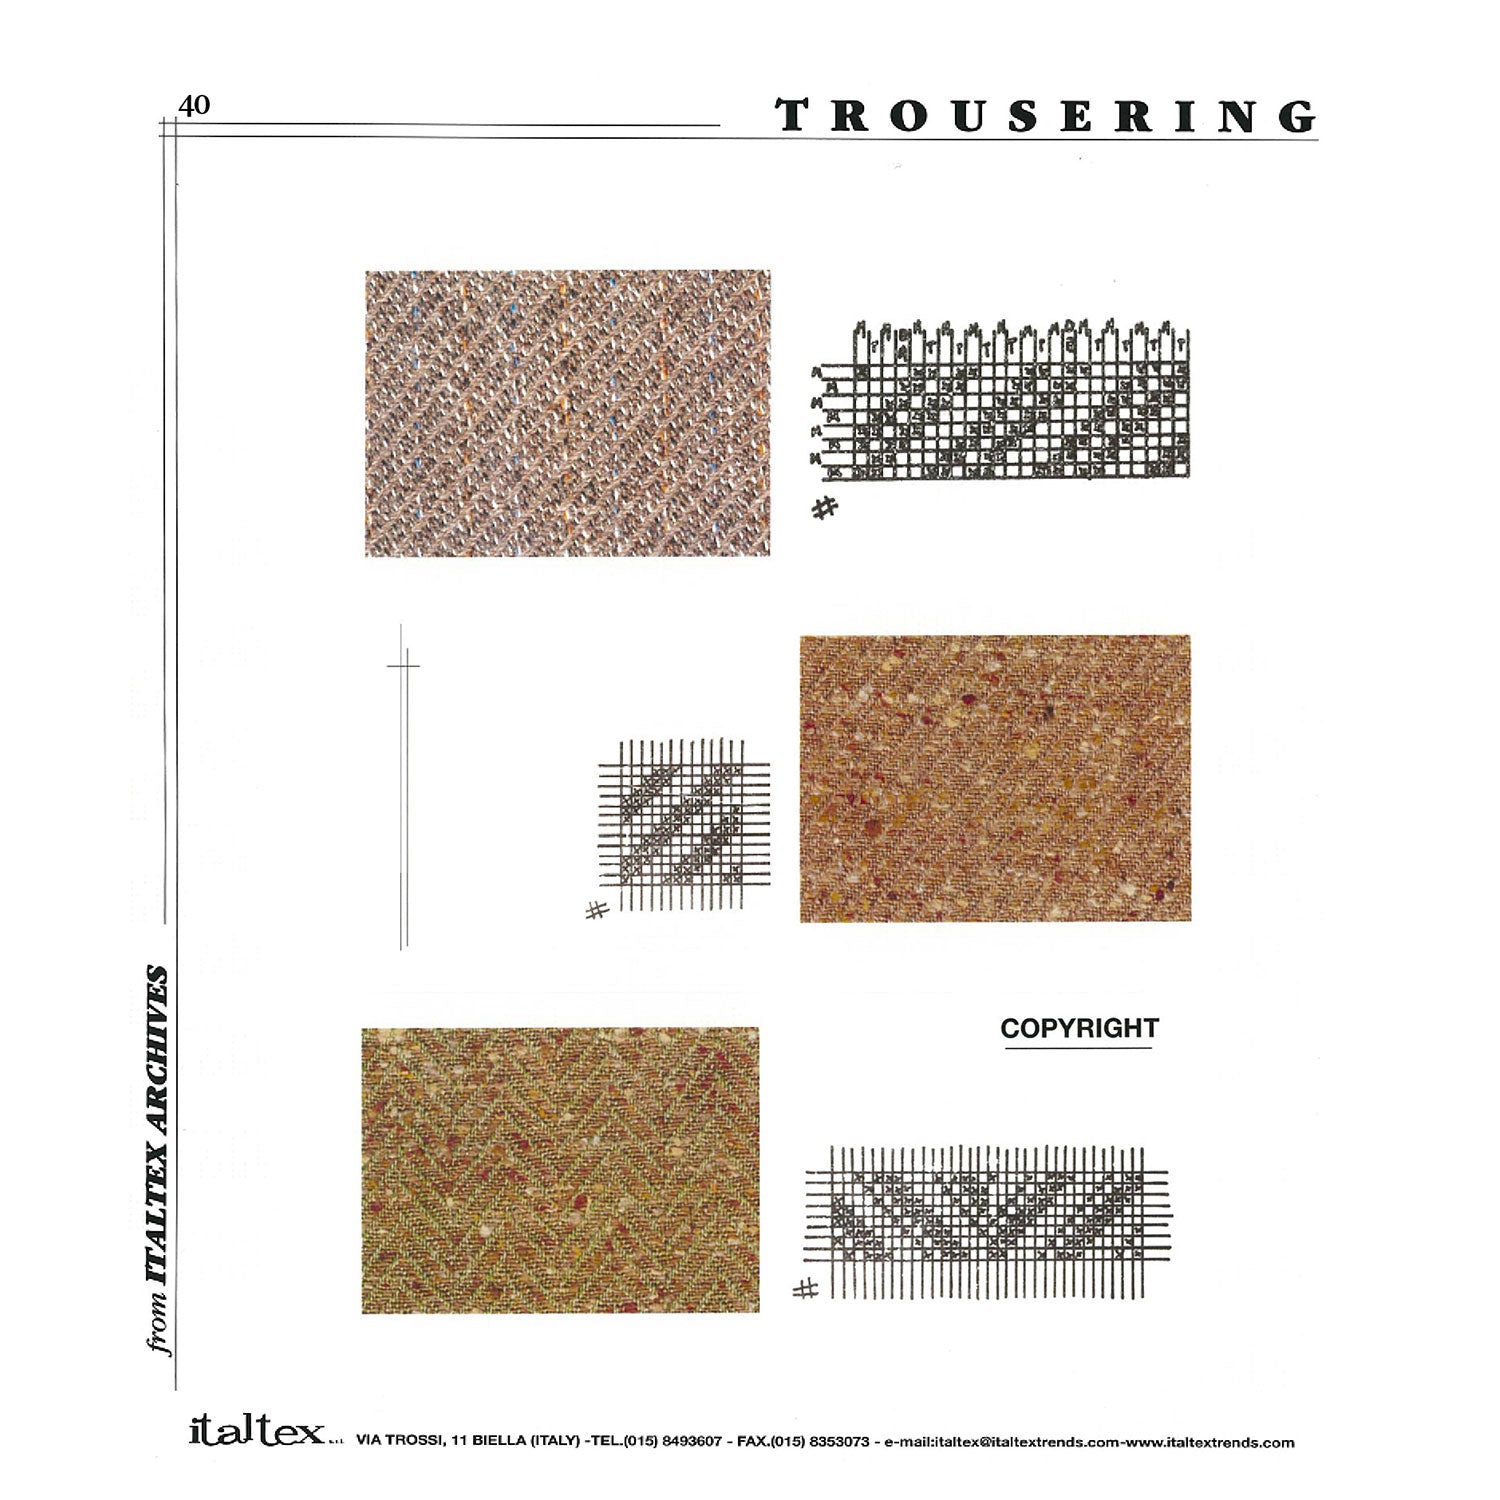 Pictures of three fabrics for winter trousers: a beige diagonal on a grey and beige ground made of twist yarns; a textured light brown diagonal on a medium/light reddish brown ground with reddish brown neppy yarns; an herringbone on a greenish brown ground with neppy yarns all with their weaves